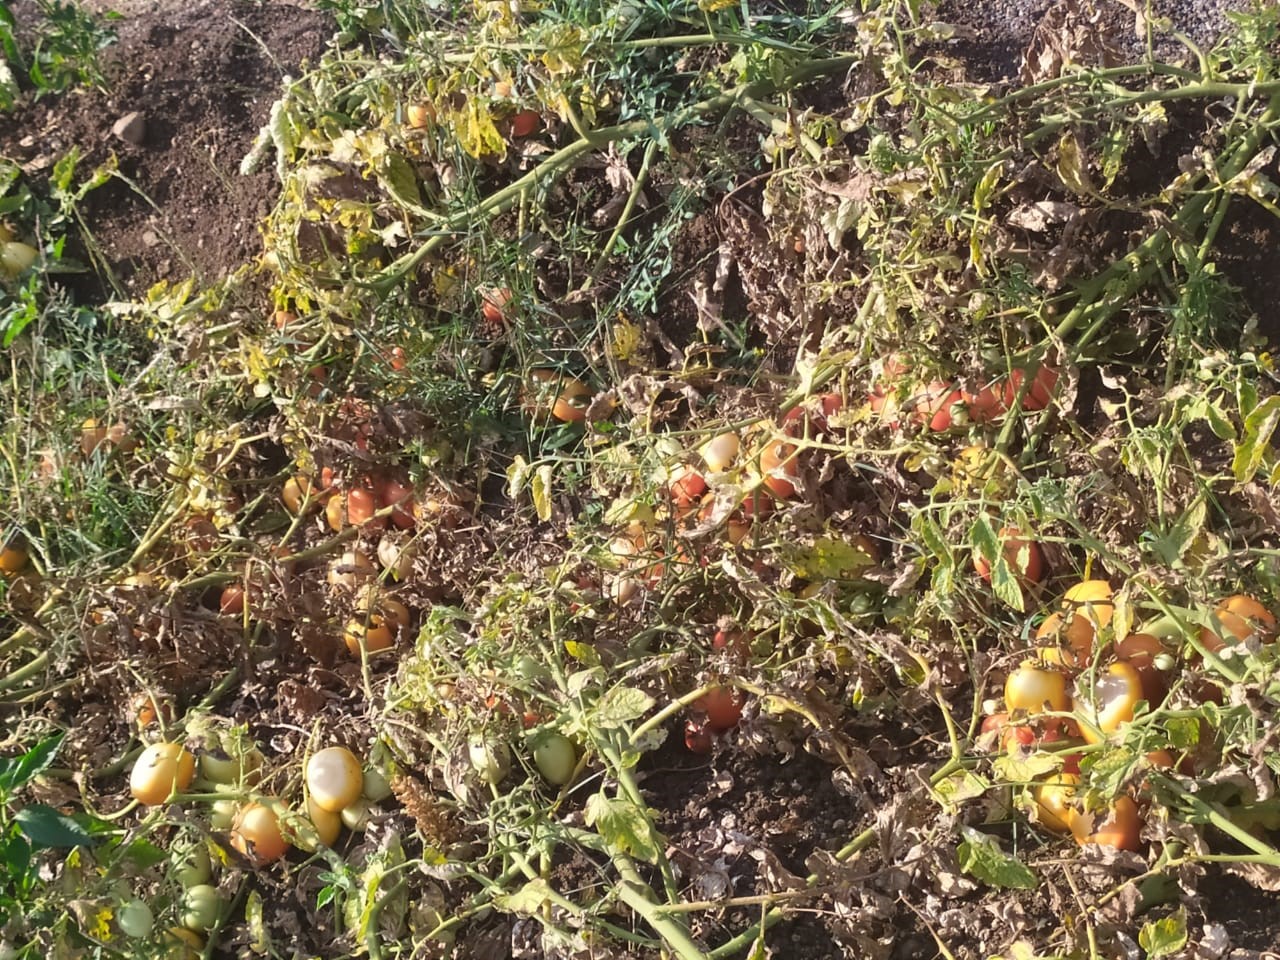 A crop of unharvested tomatoes